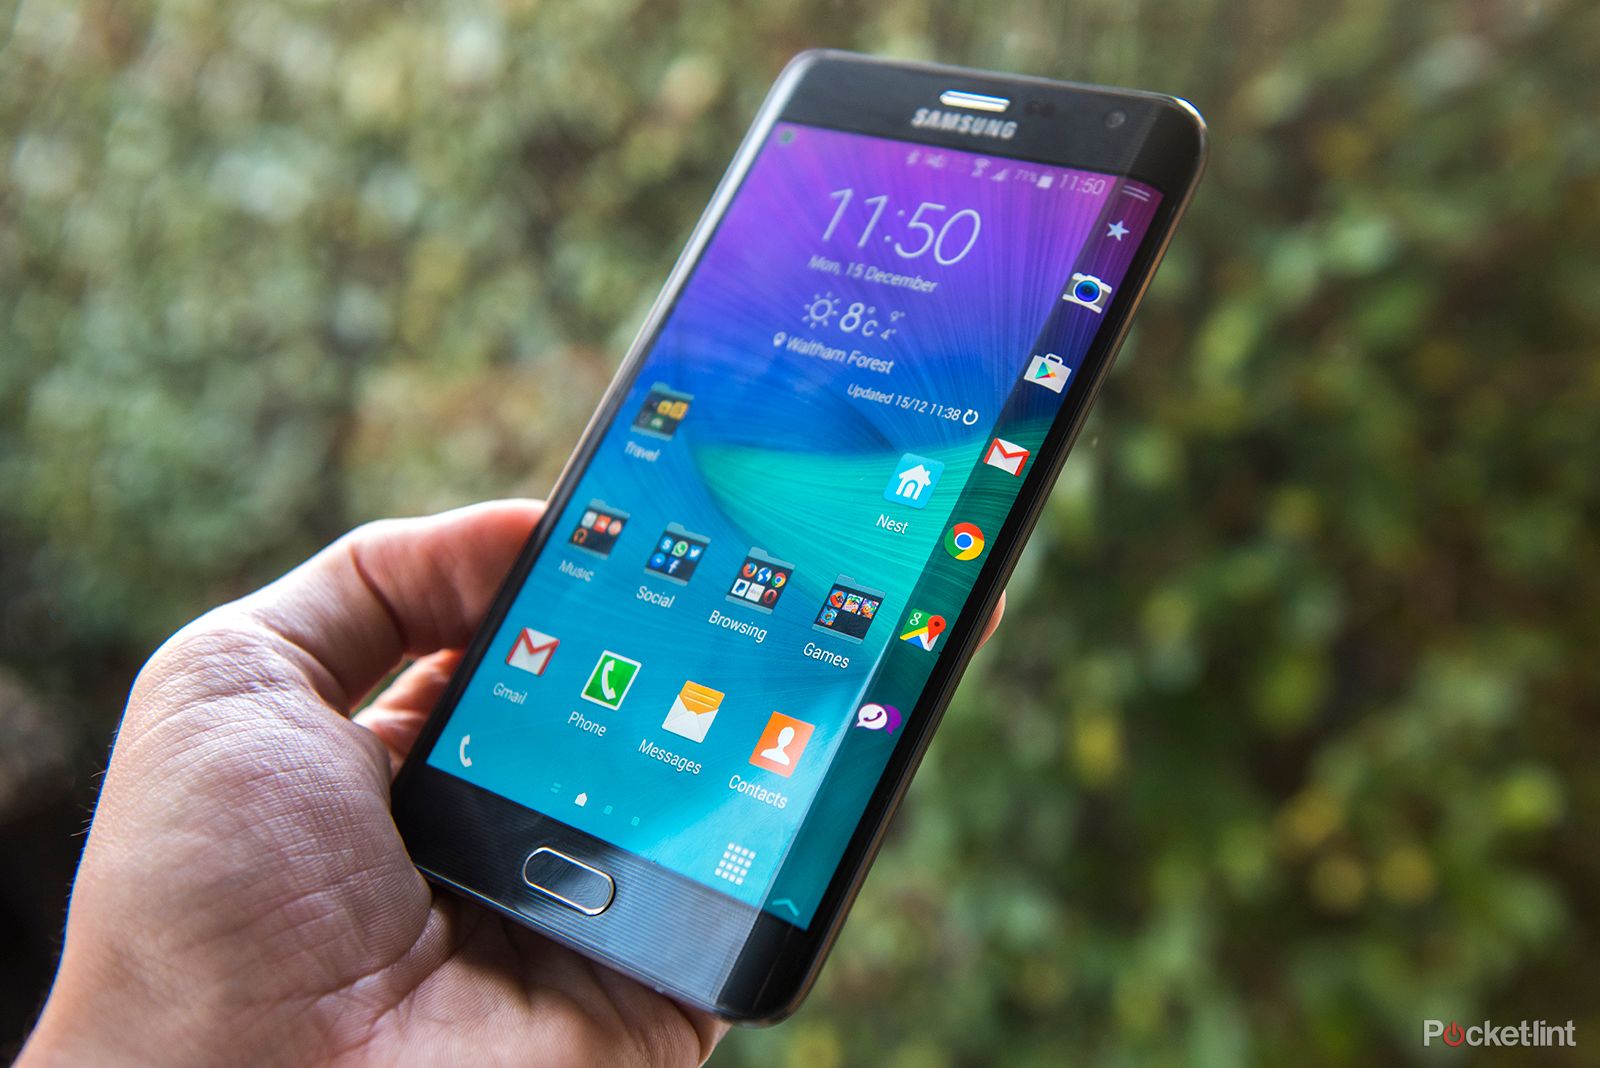 samsung might unveil two galaxy s6 phones next month including one with a wraparound screen image 1